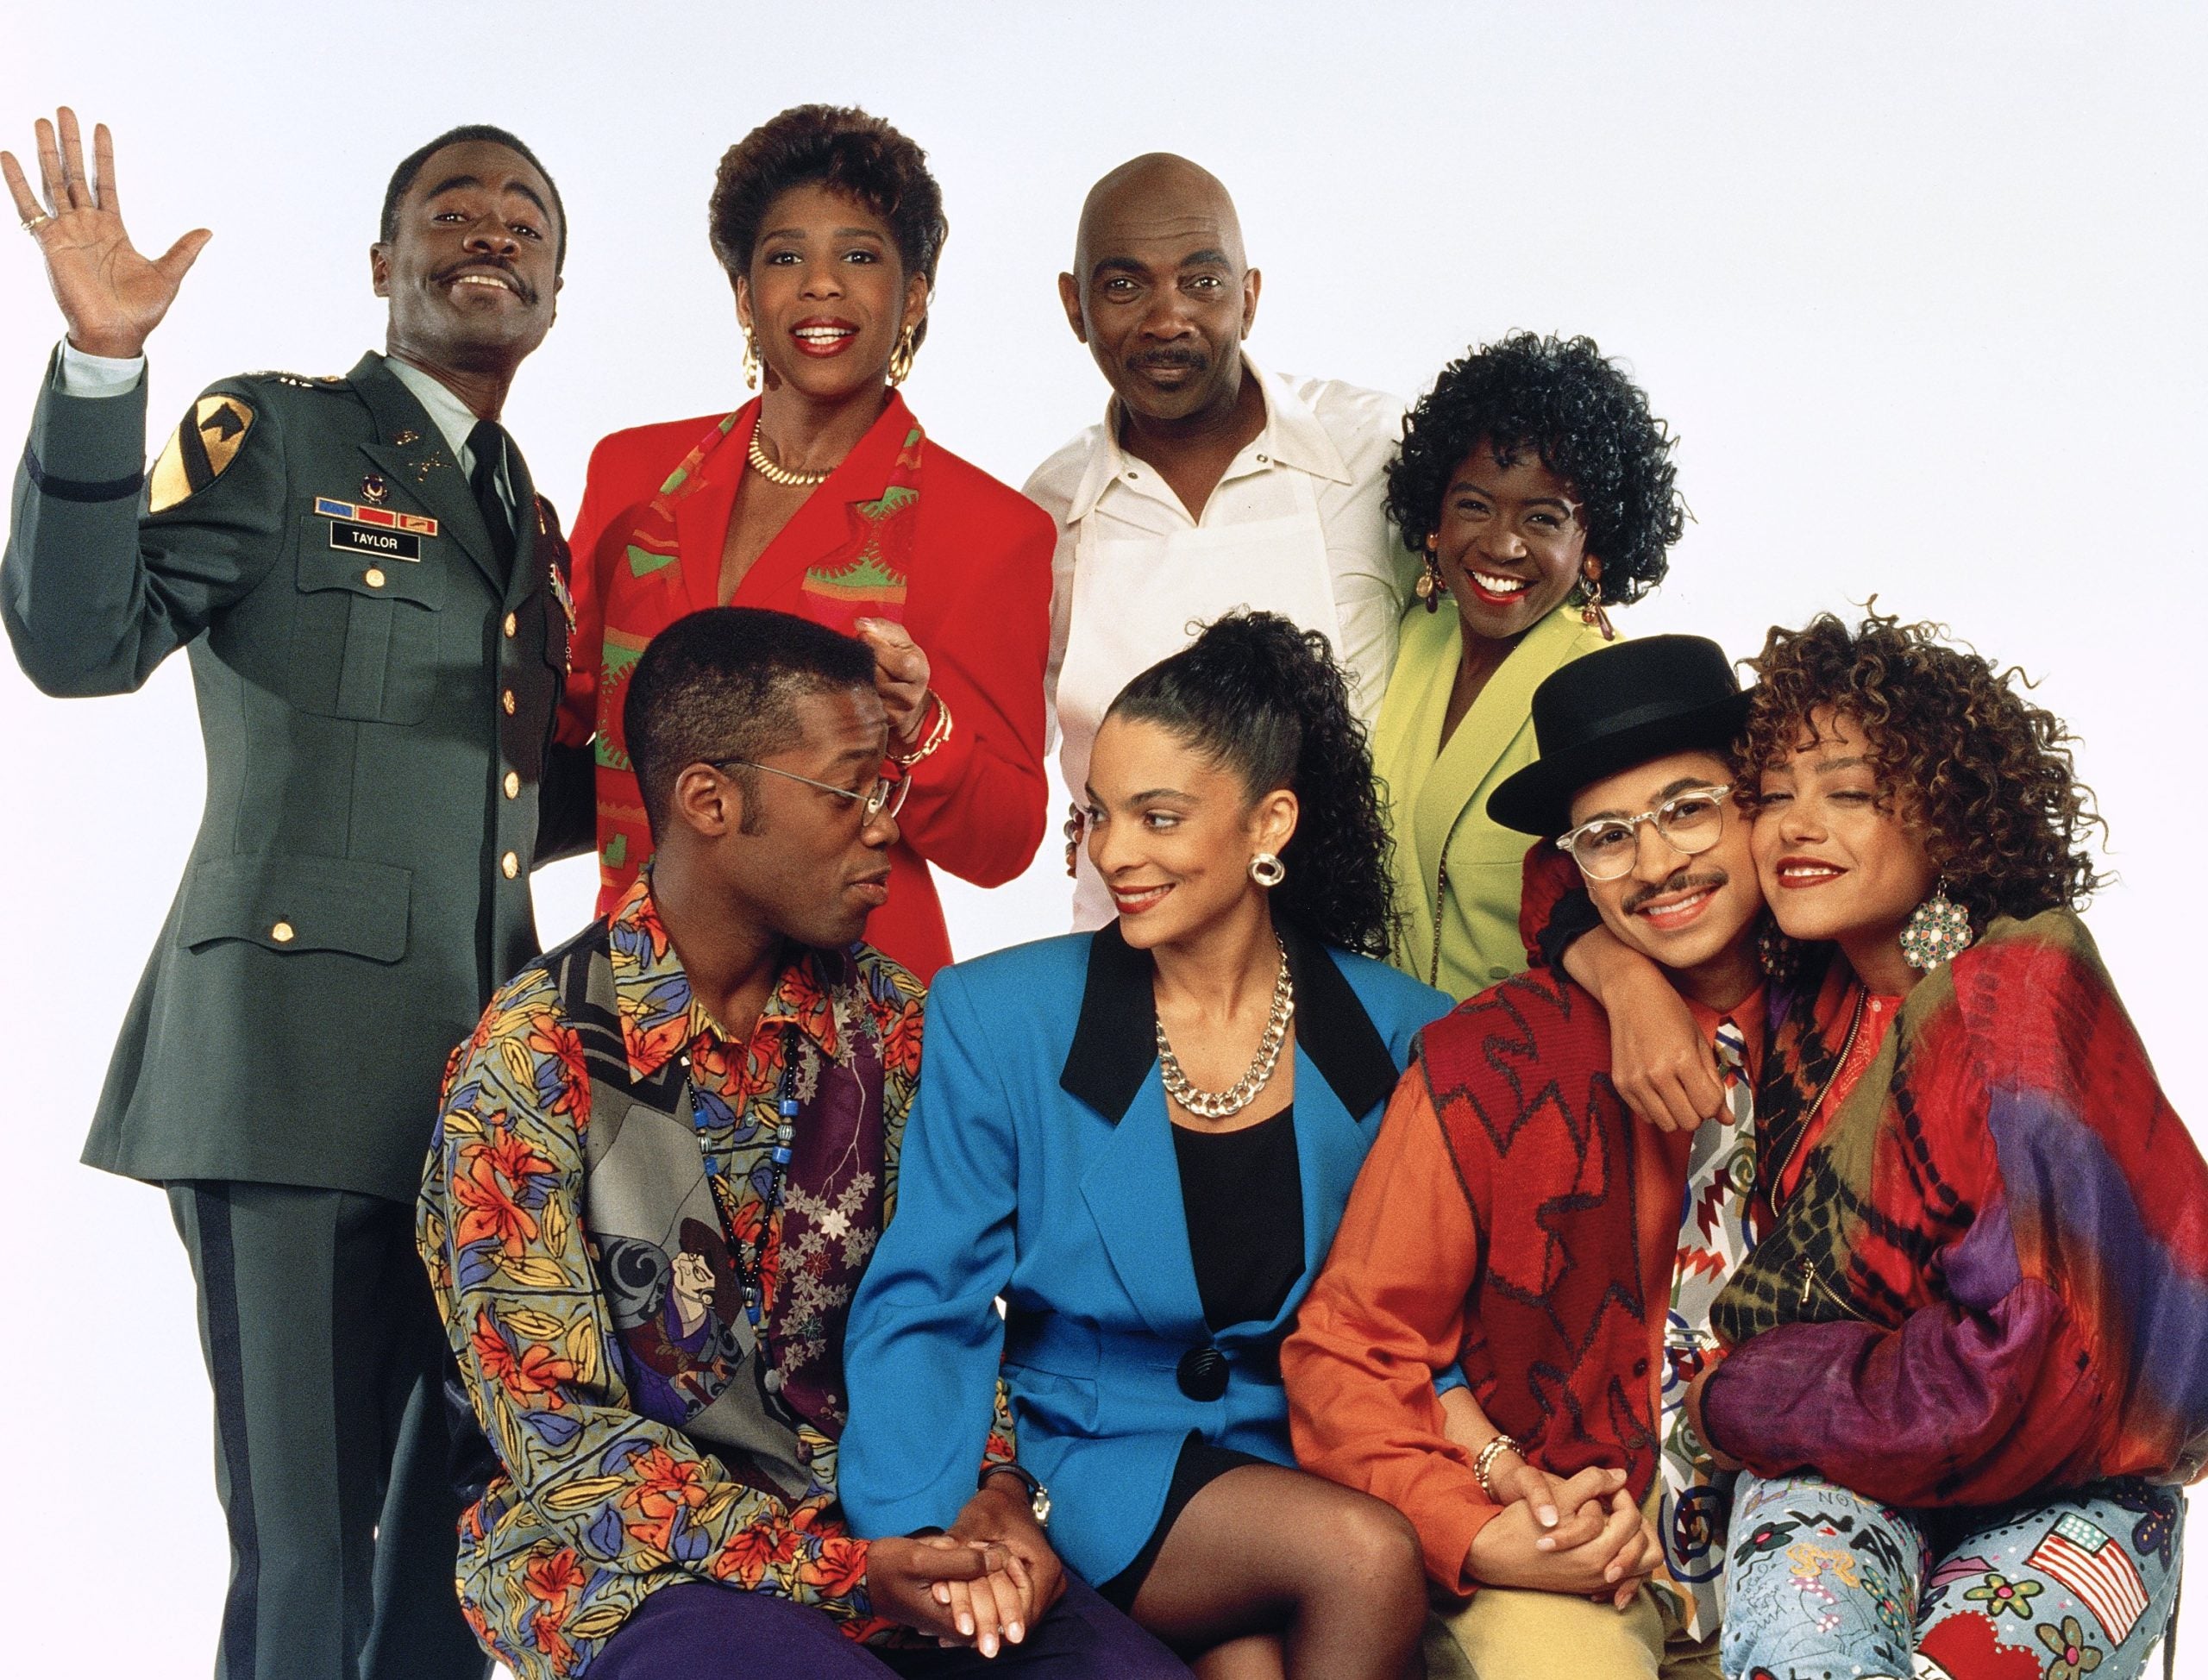 90s & Early Aughts TV Shows For Fashion Inspiration